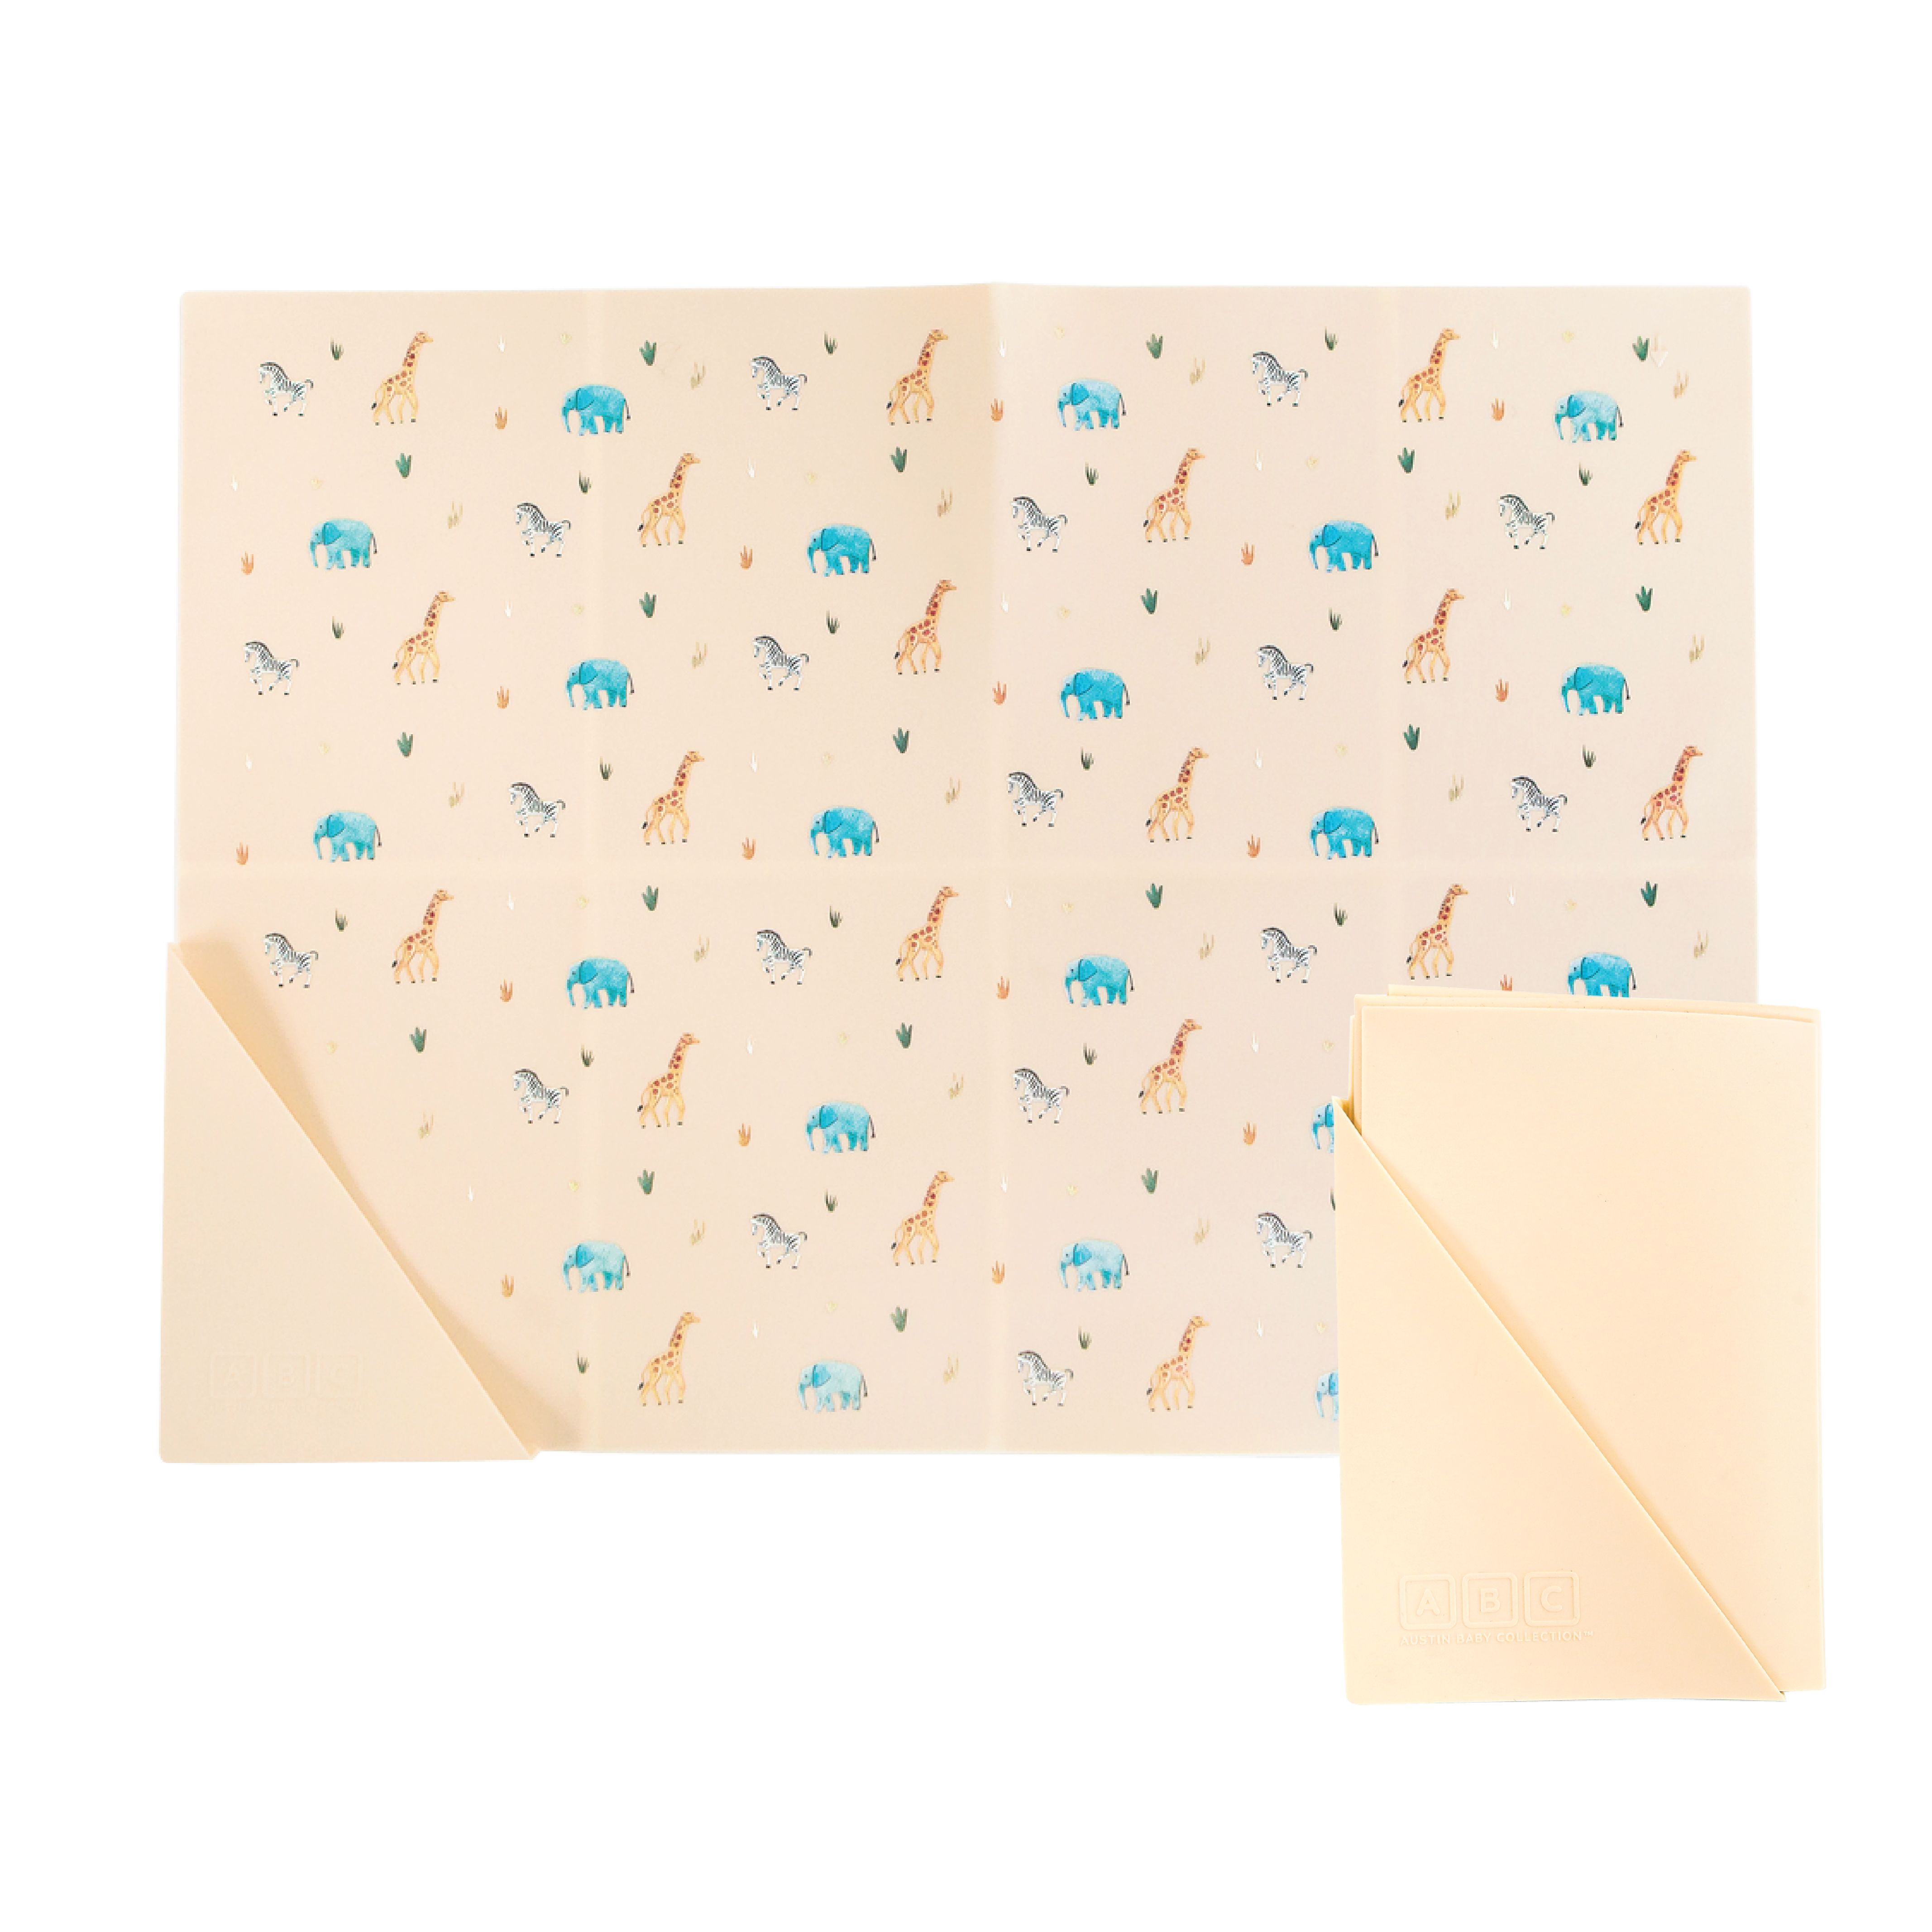 cream silicone placemat in safari animal print, shown folded and unfolded